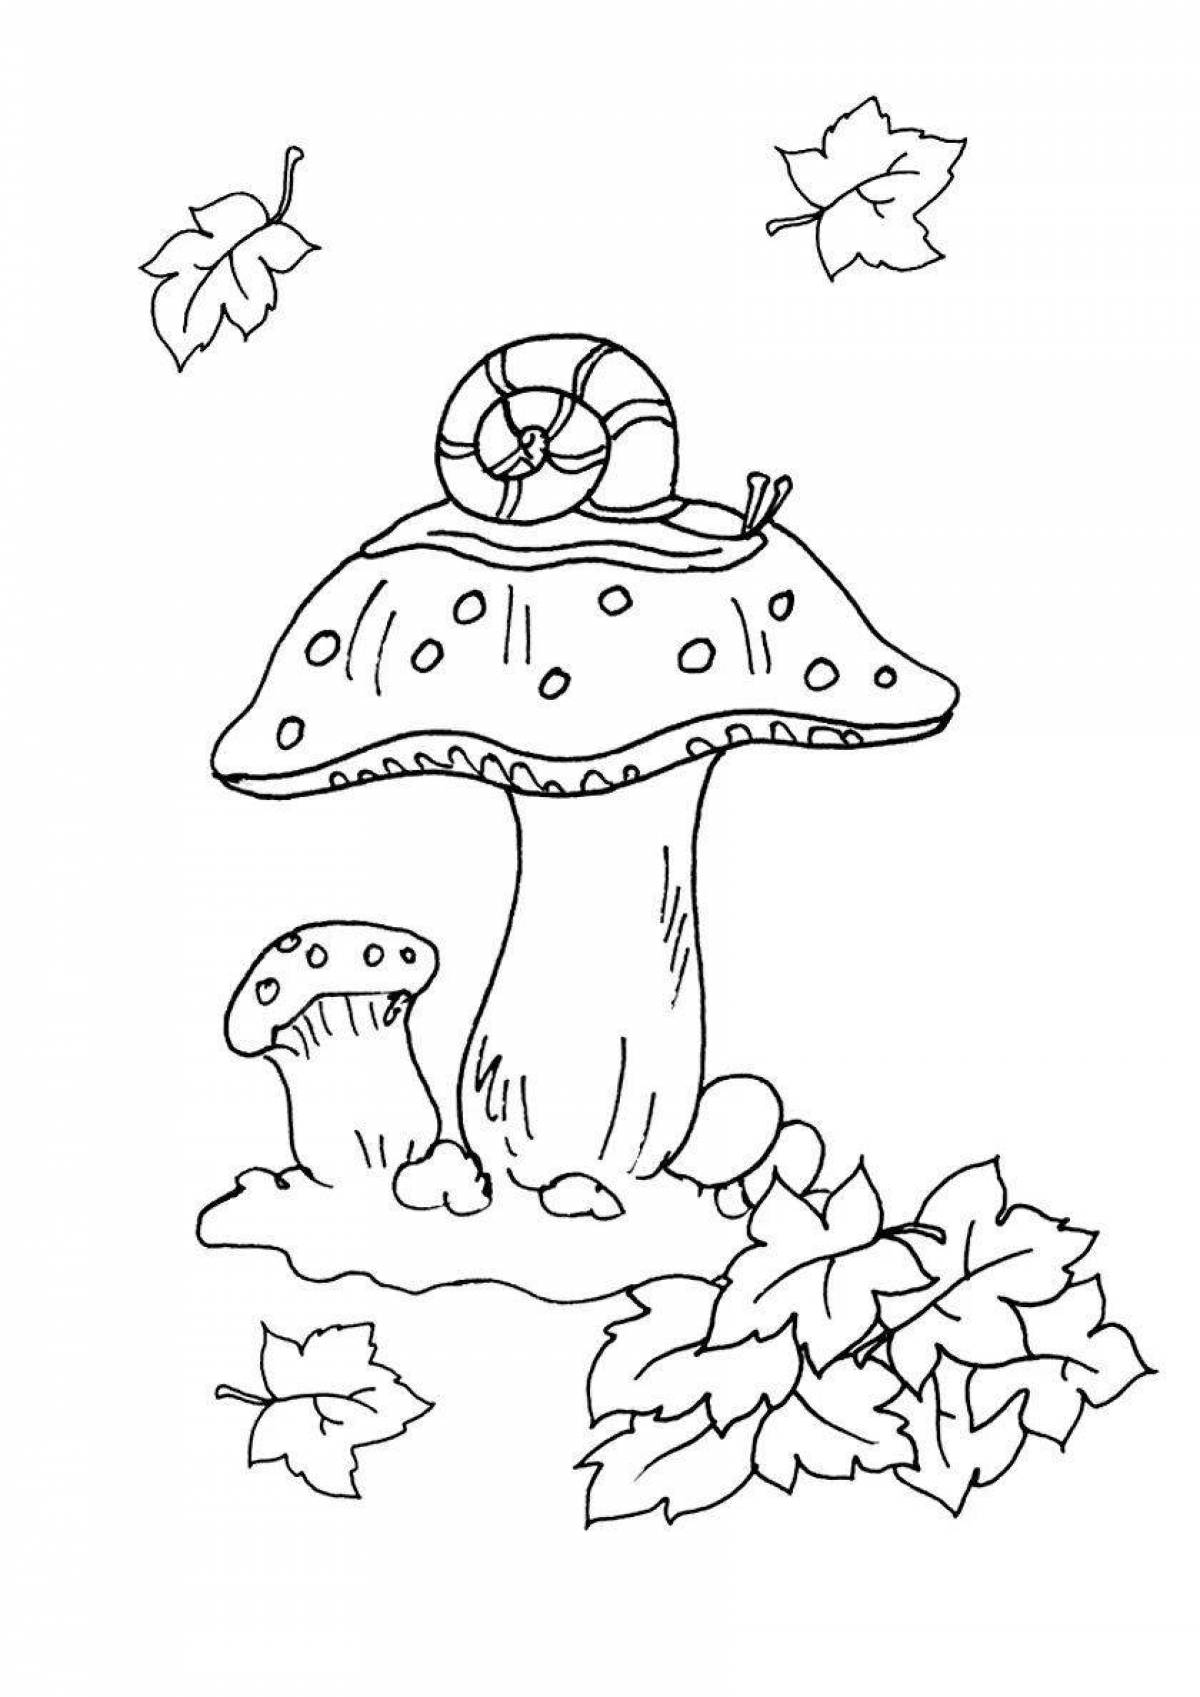 A fun autumn coloring book for 5-6 year olds